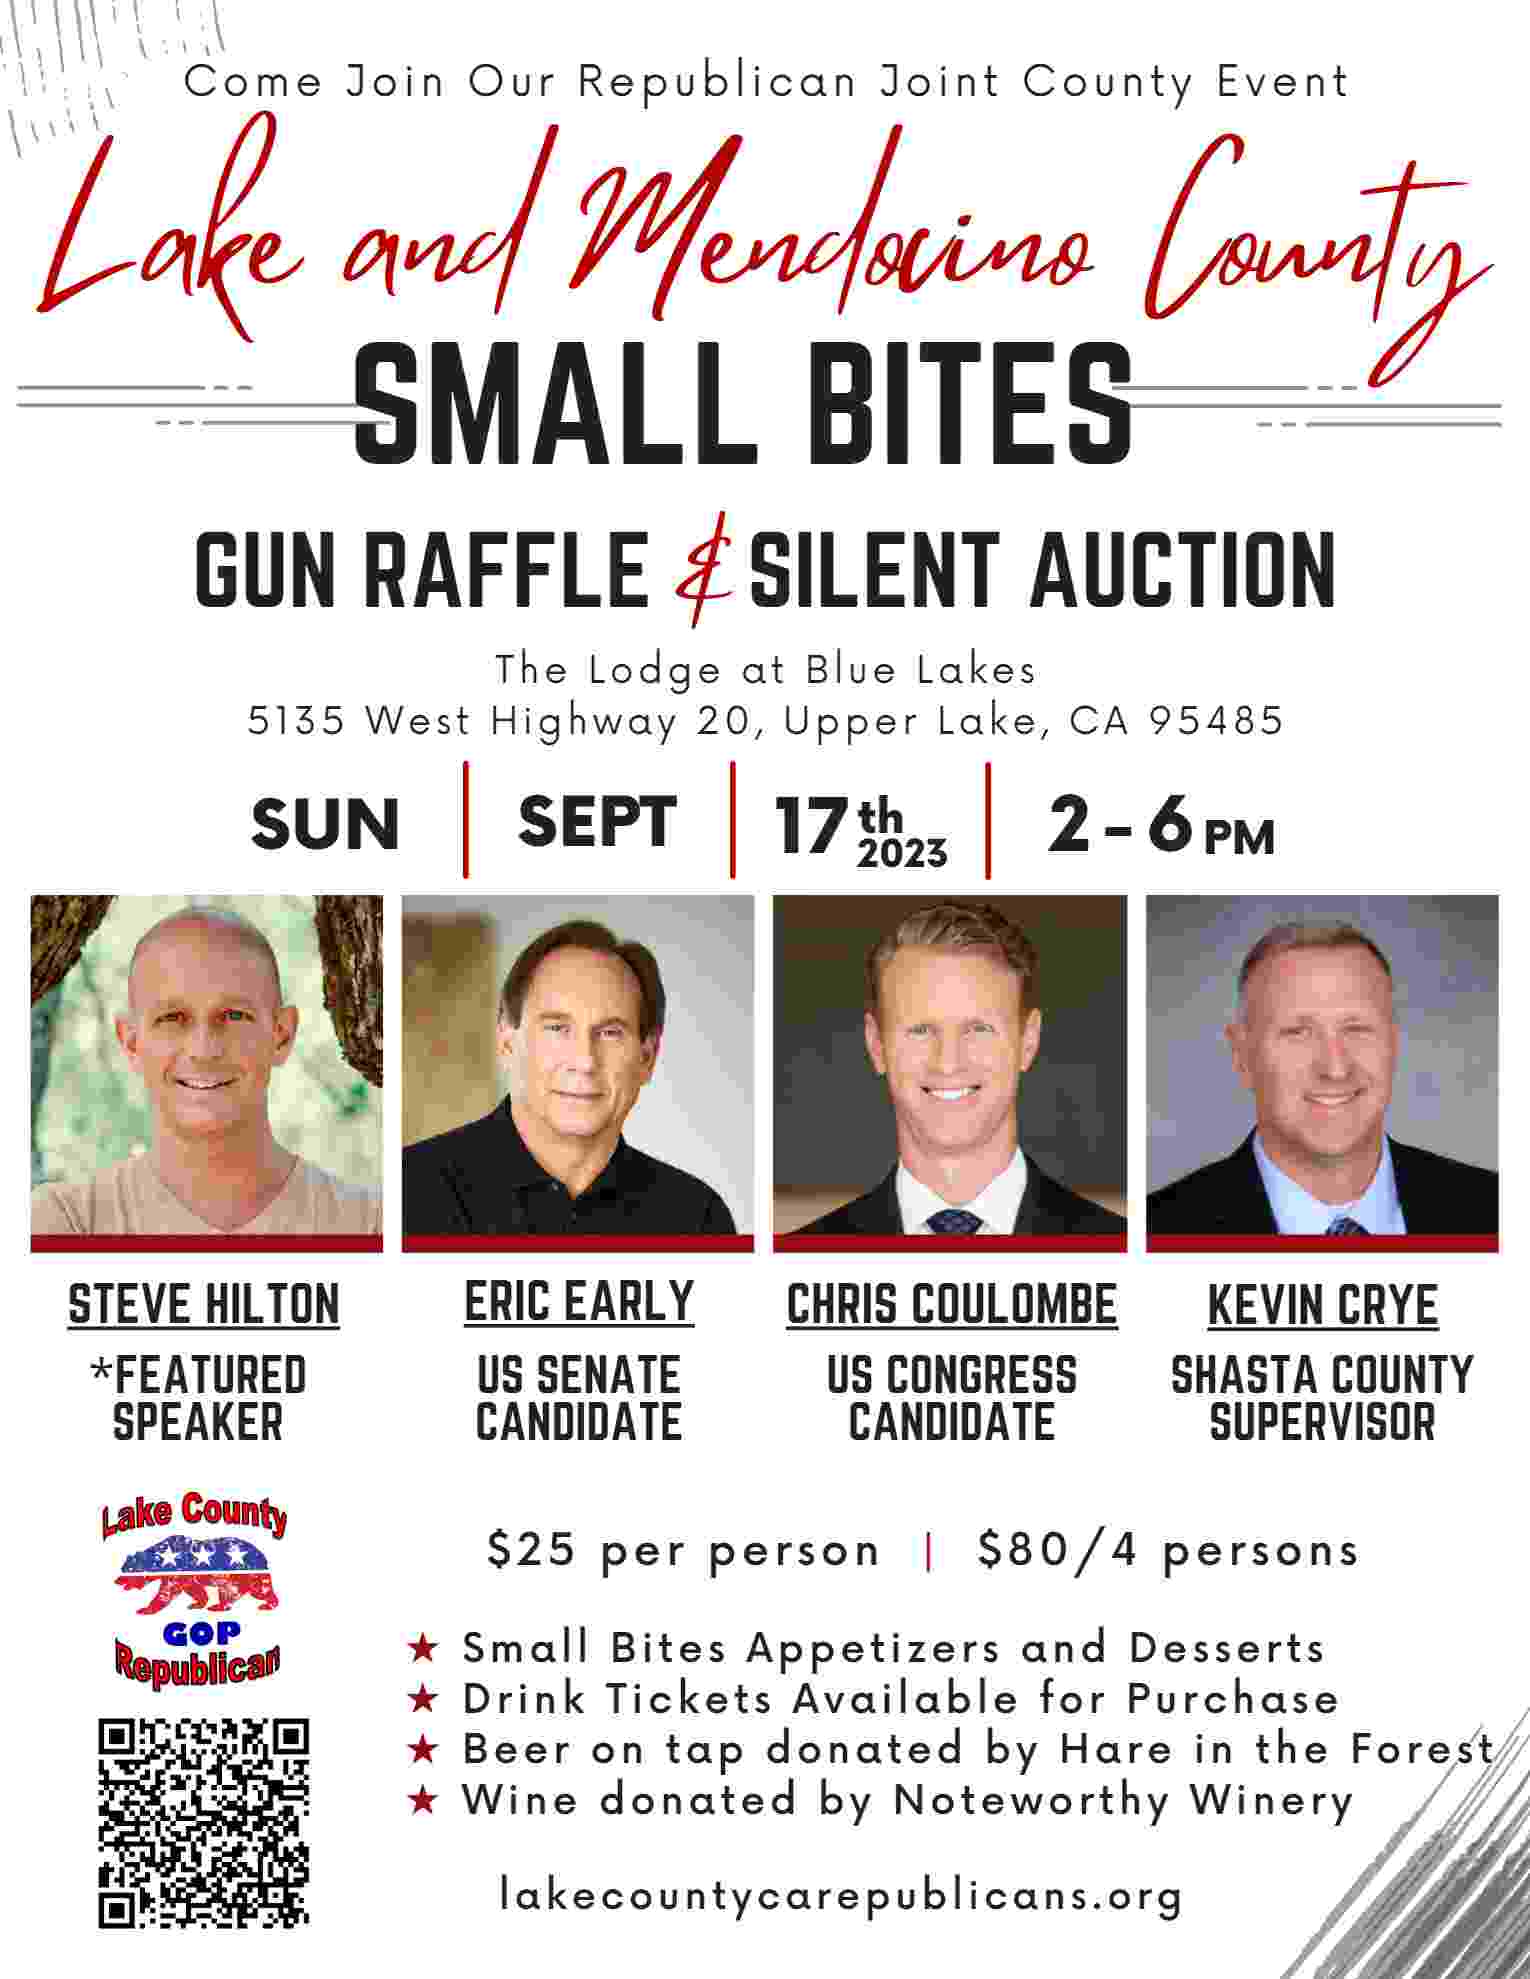 Republican Joint County Event Brings Prominent Speaker Steve Hilton and Distinguished Guests to Lake and Mendocino Counties